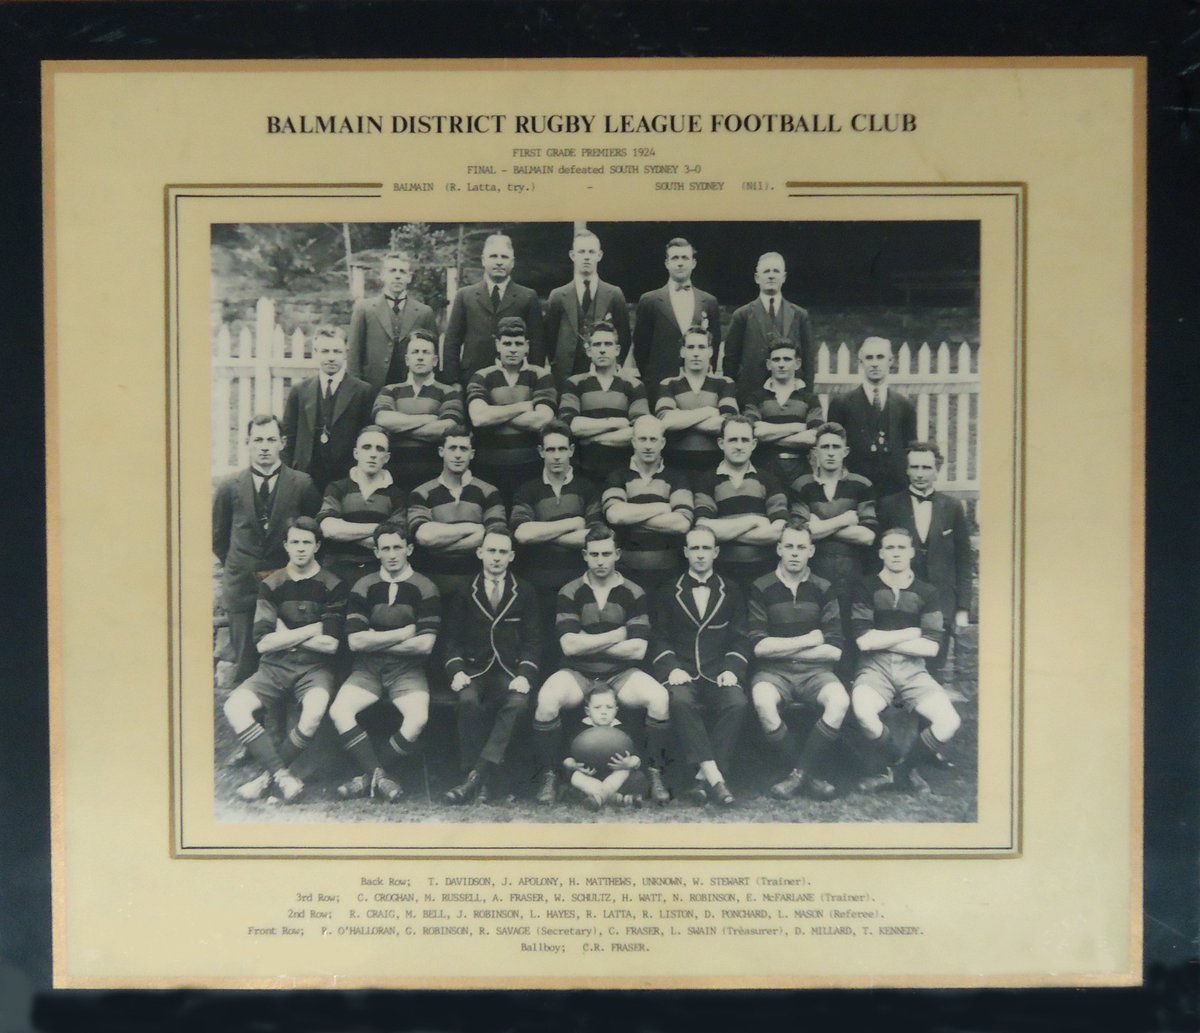 Balmain on Twitter: Balmain started the with premiership that ended the Halloway coaching era. This was followed with another in 1924 under Chook Fraser, who retired in 1926.